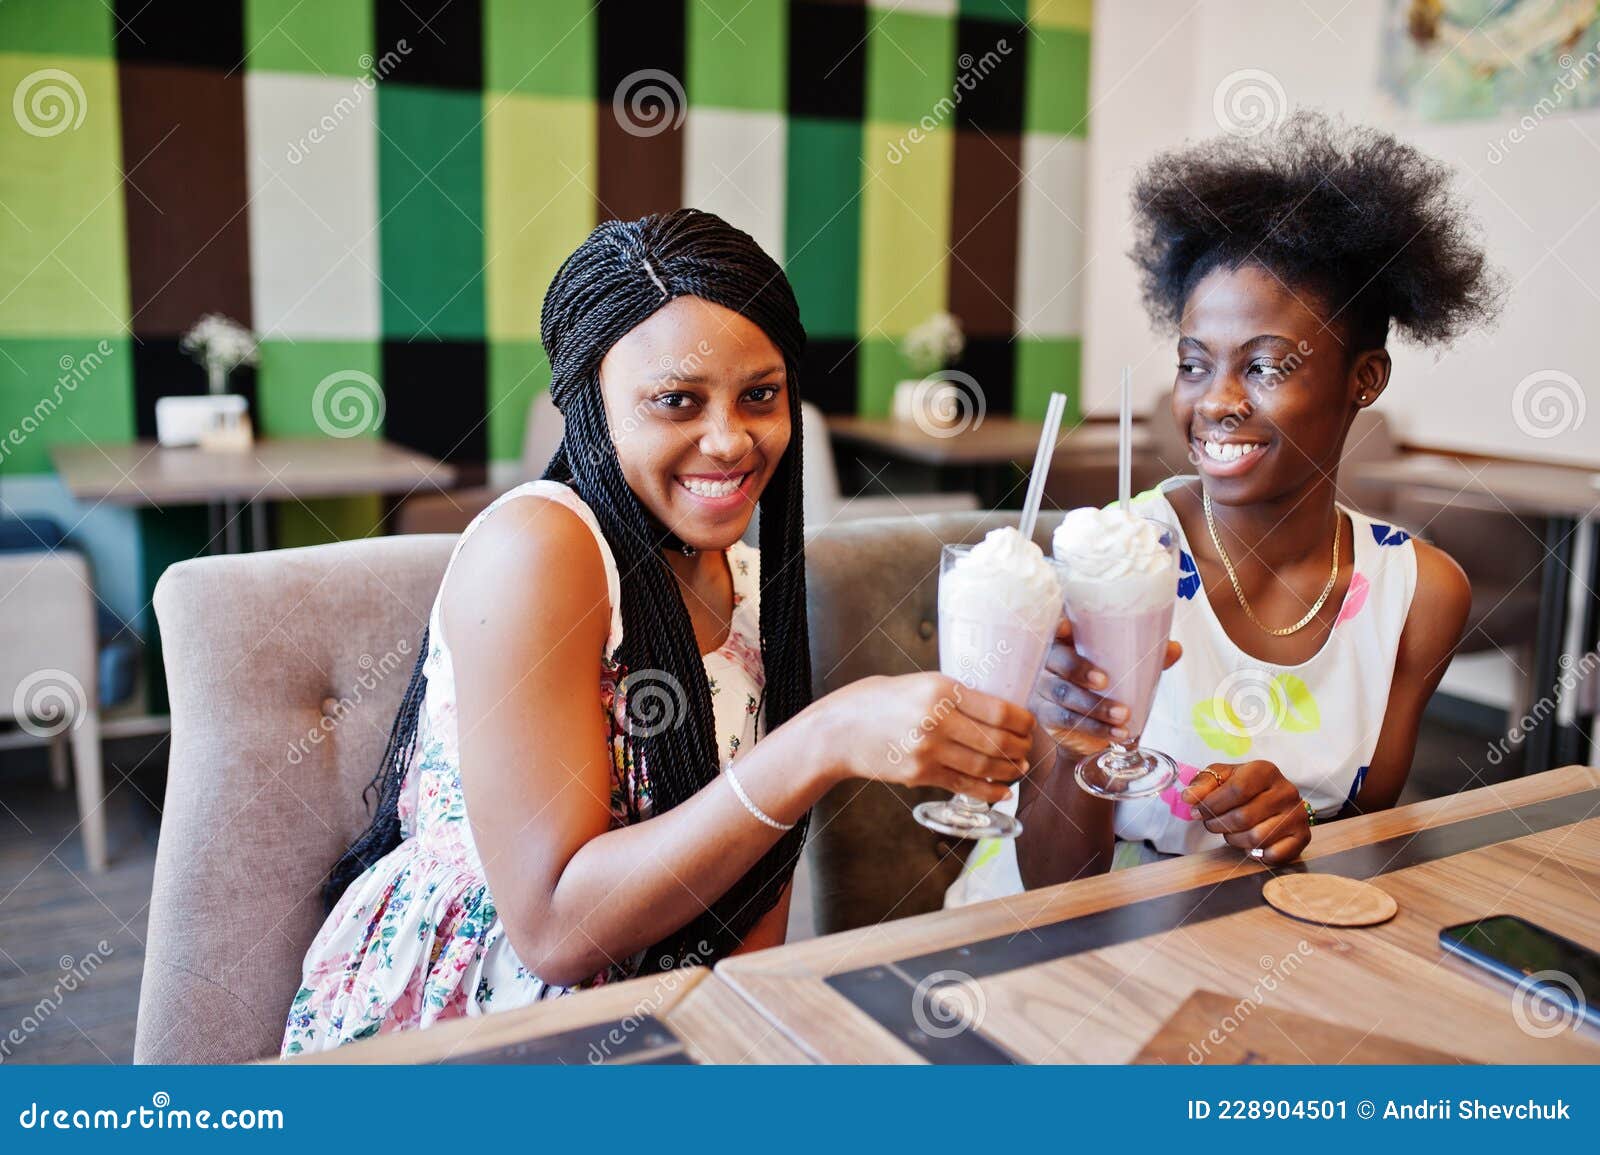 Two Black African Girlfriends At Summer Dresses Posed At Caf image